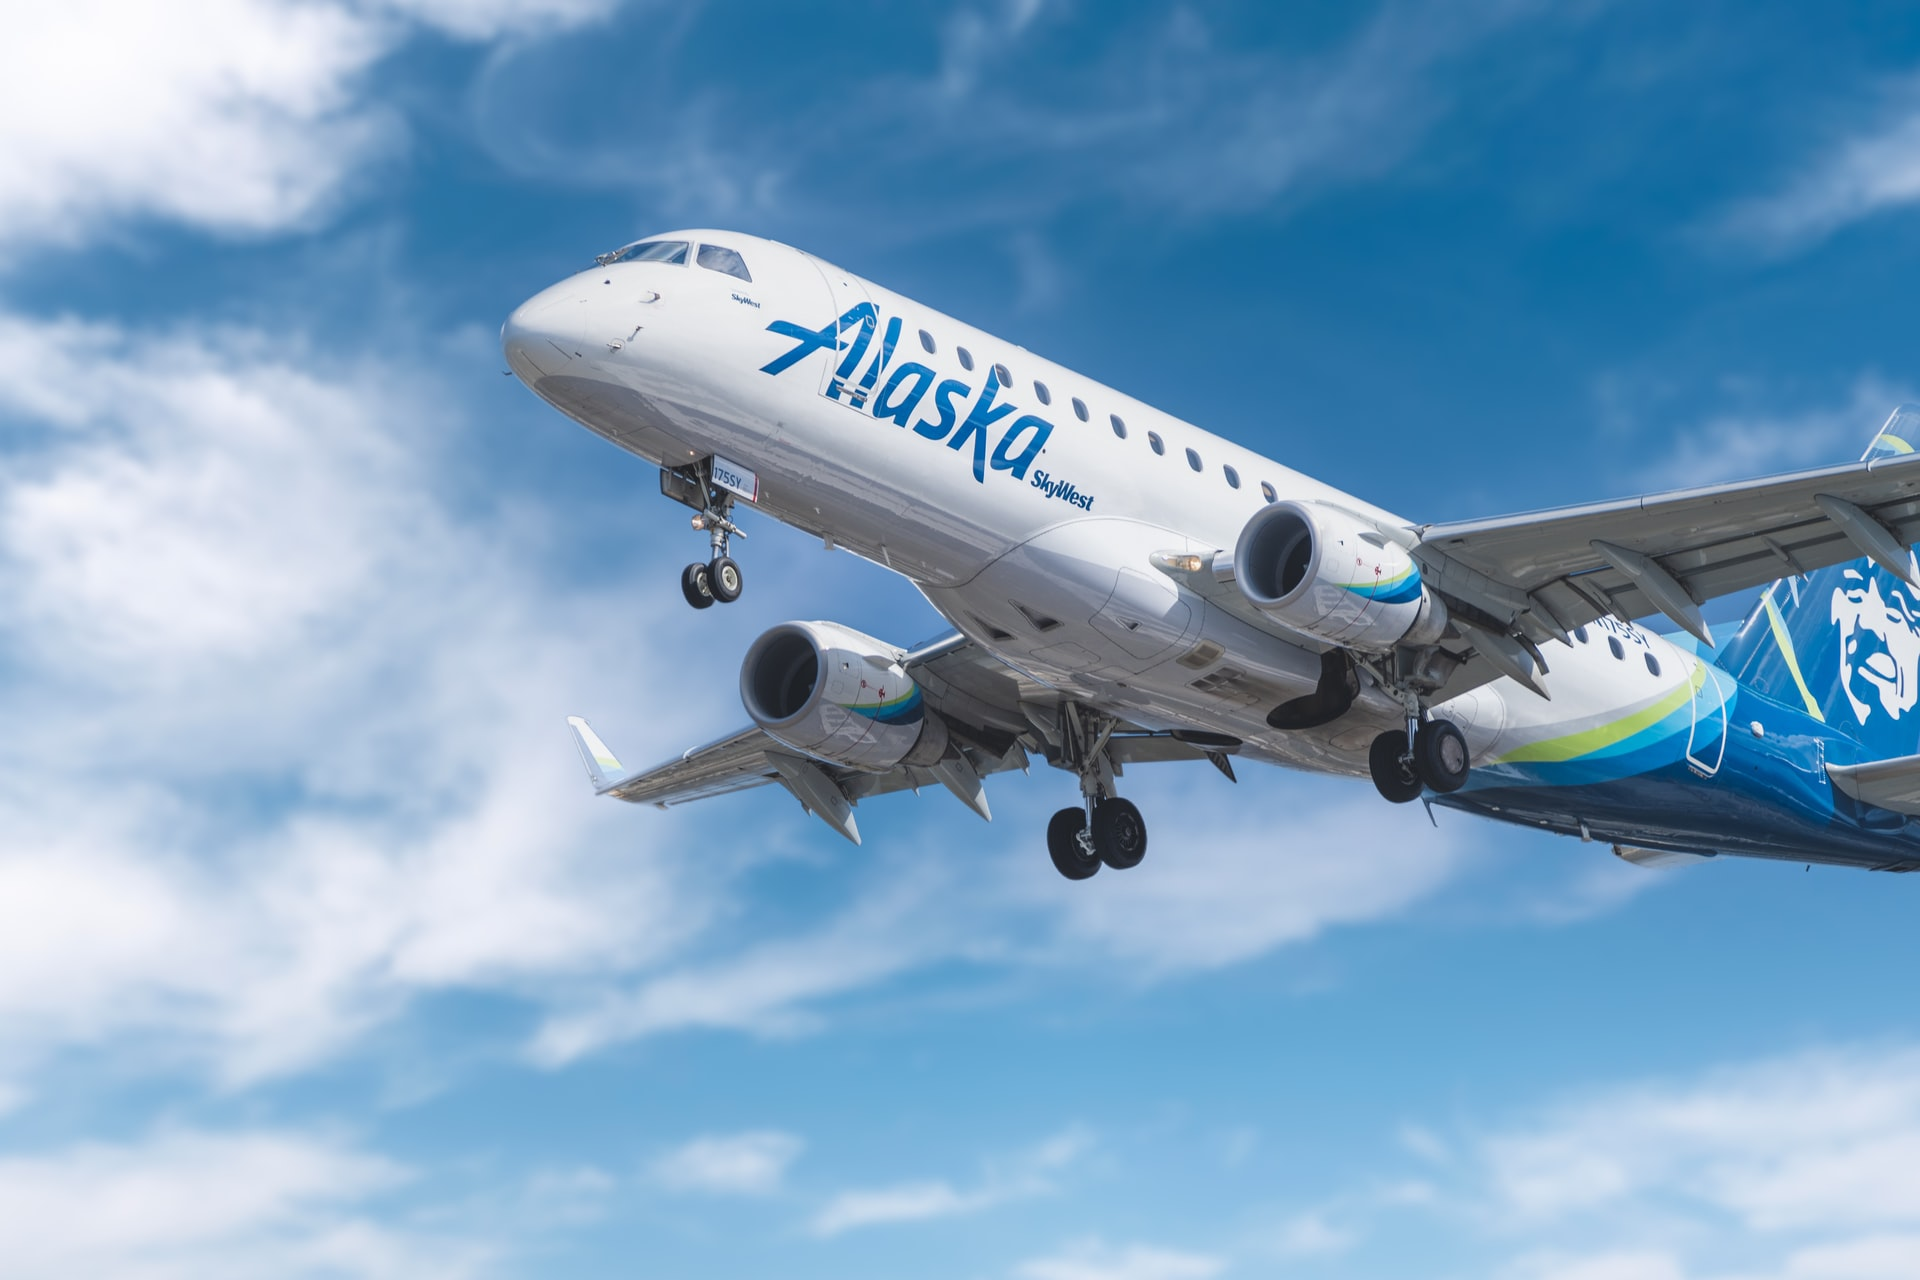 Flight phases: Alaska airlines aircraft climbing to cruise altitude.